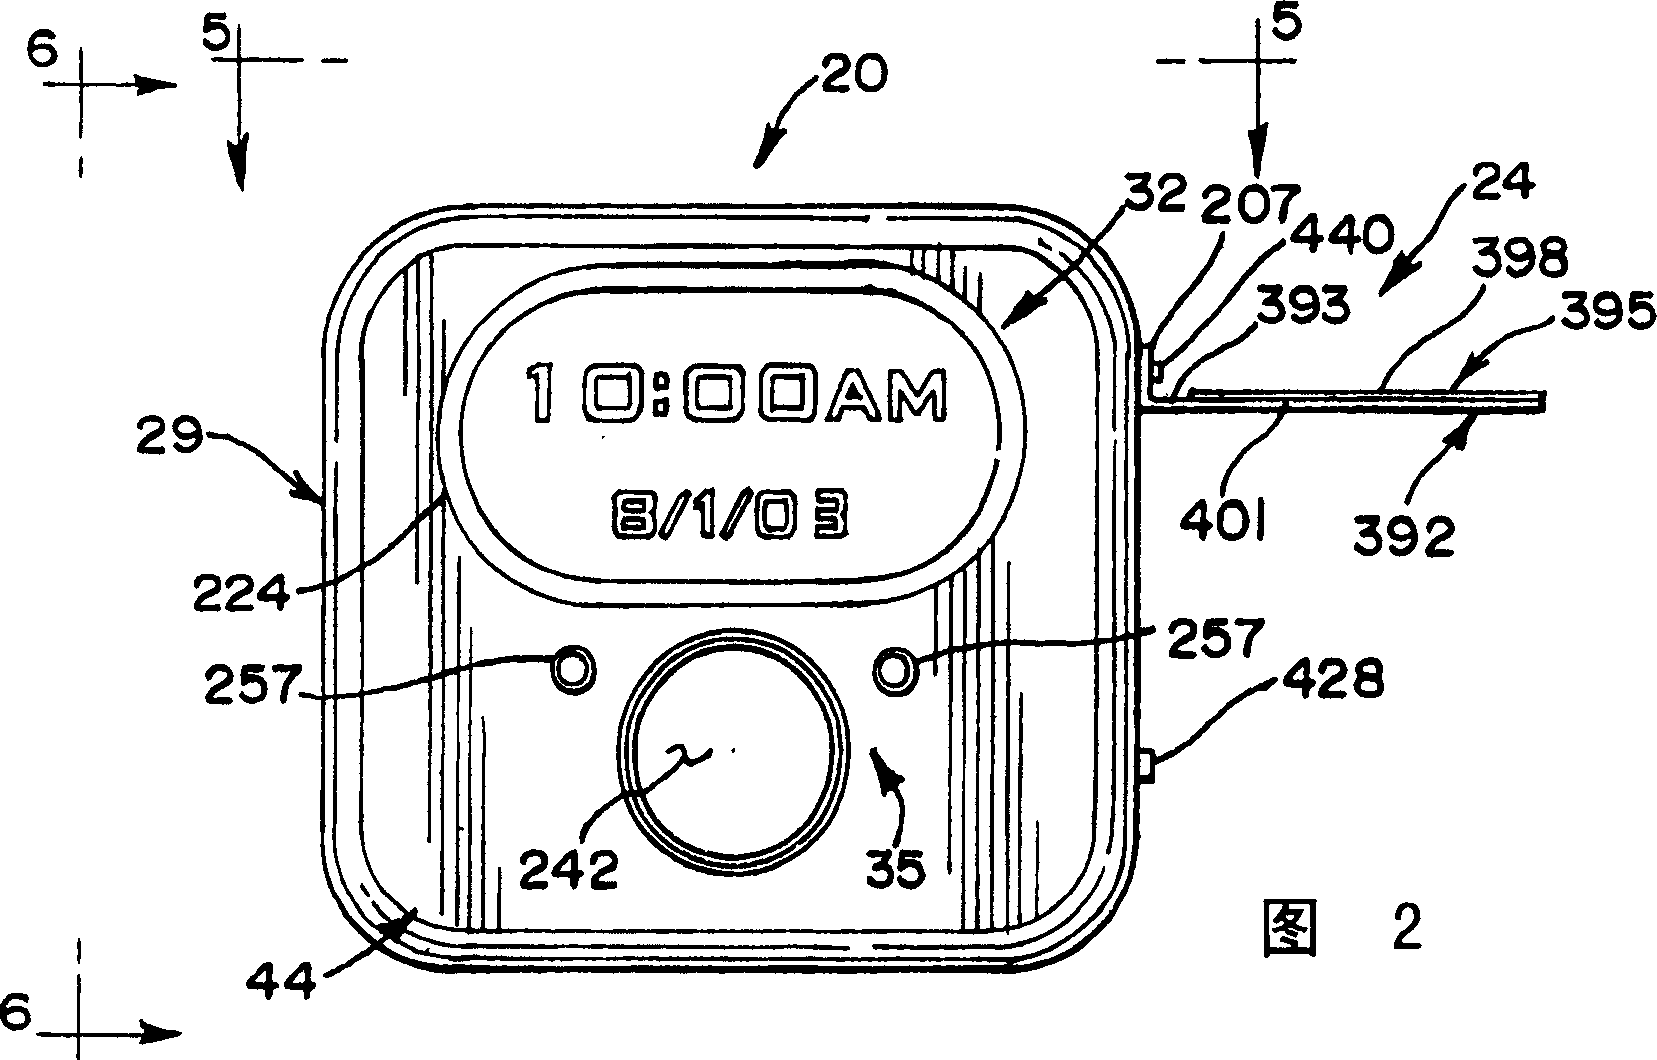 Food labeling device